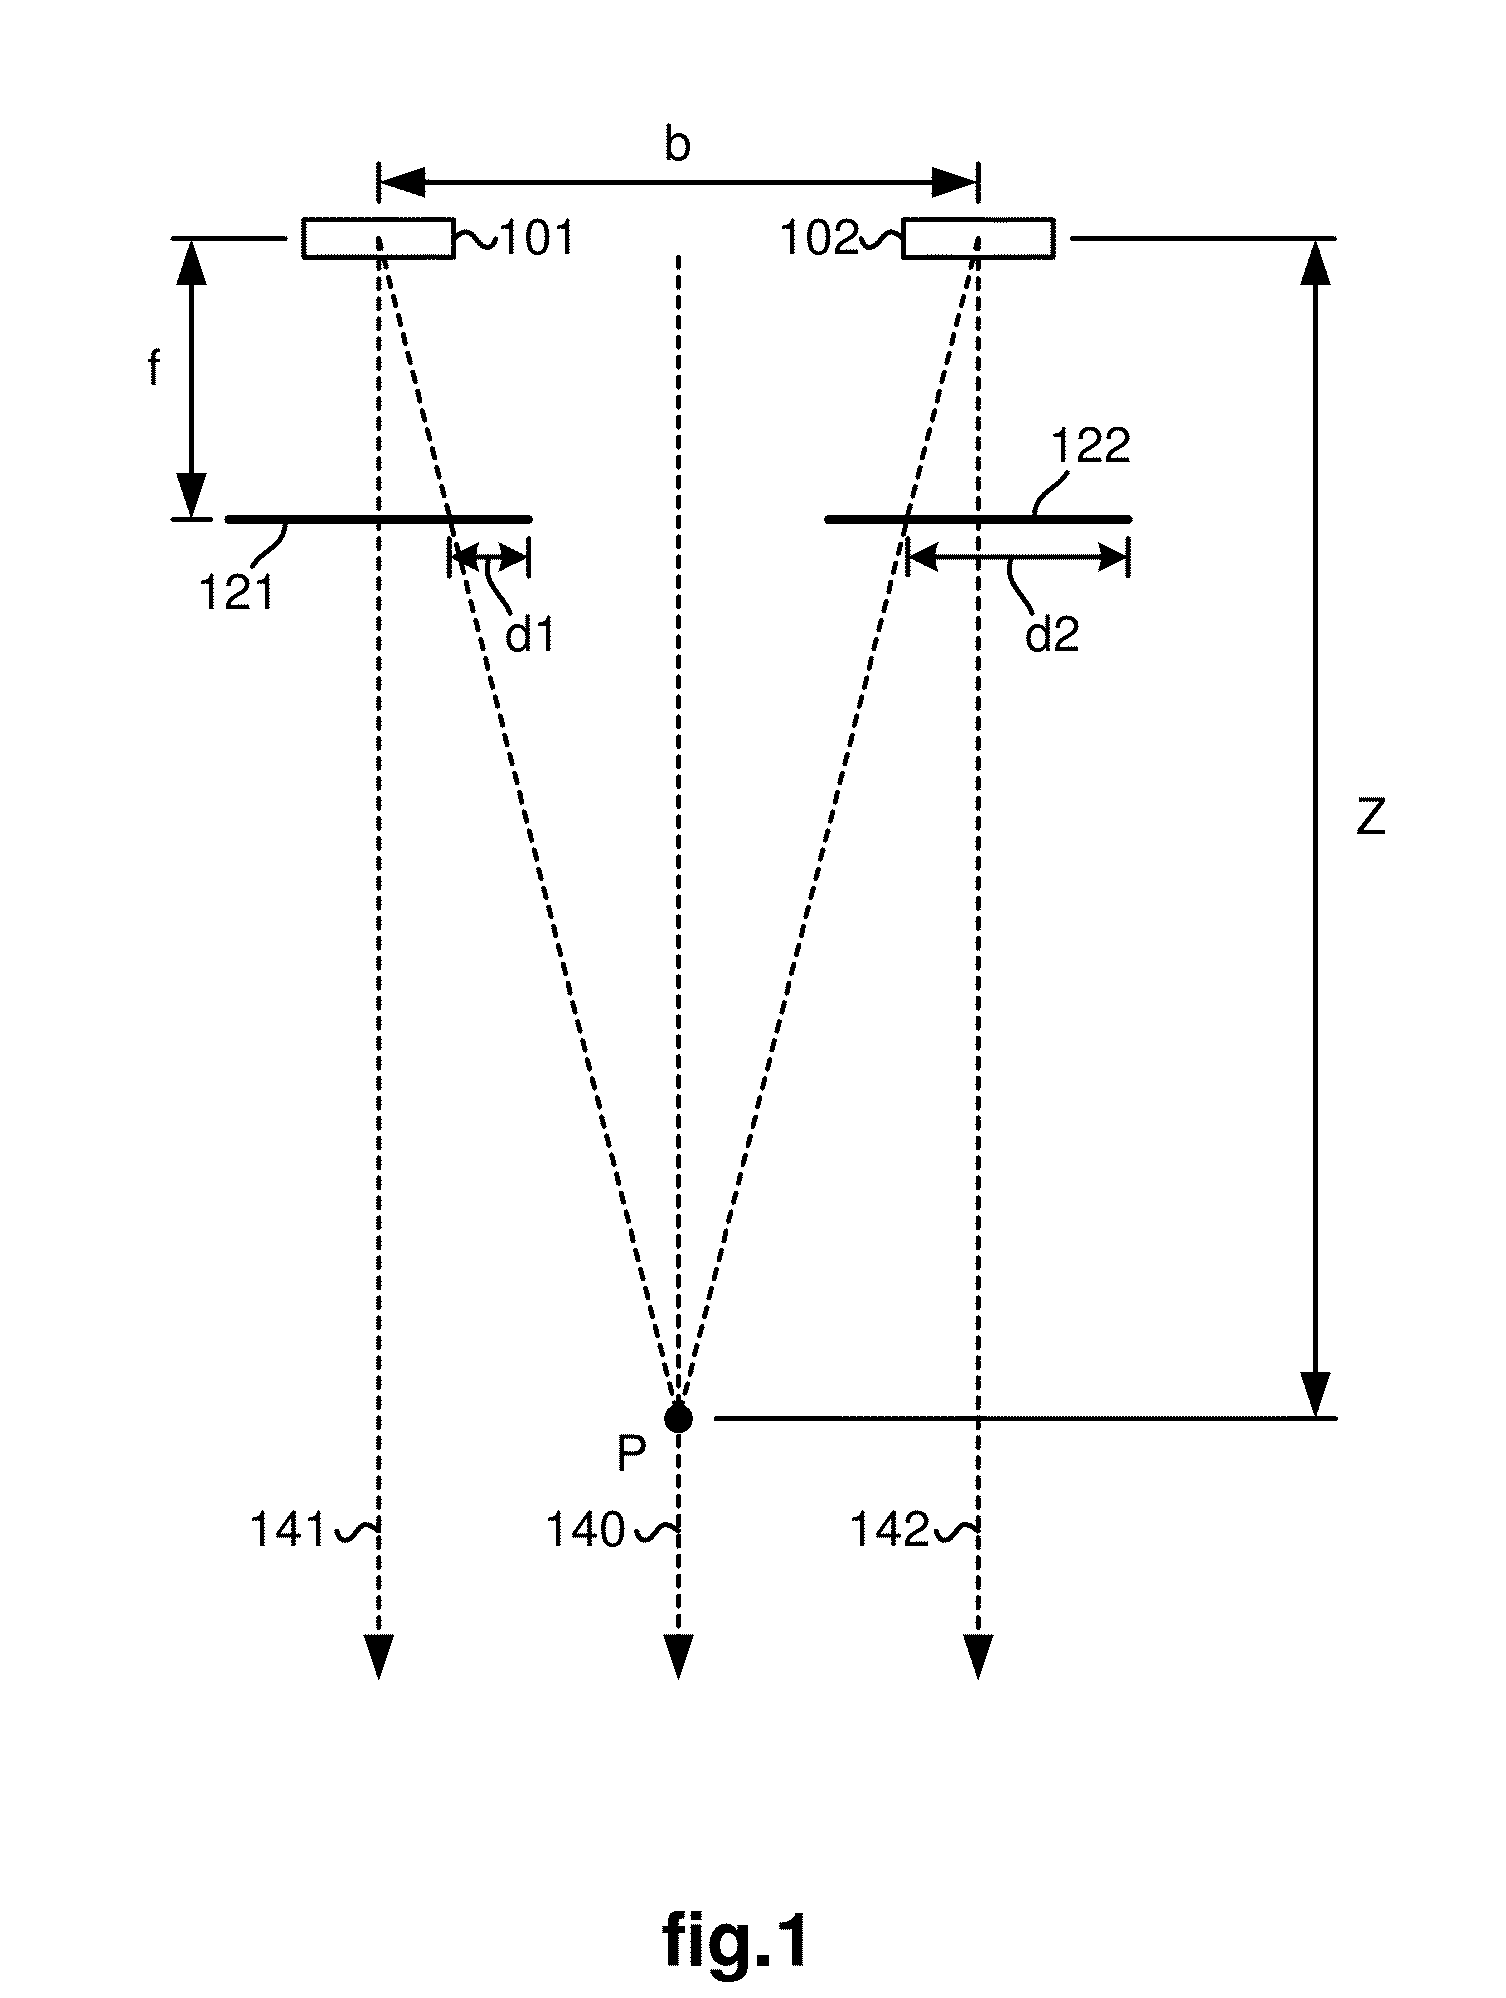 Stereo imaging system with automatic disparity adjustment for displaying close range objects